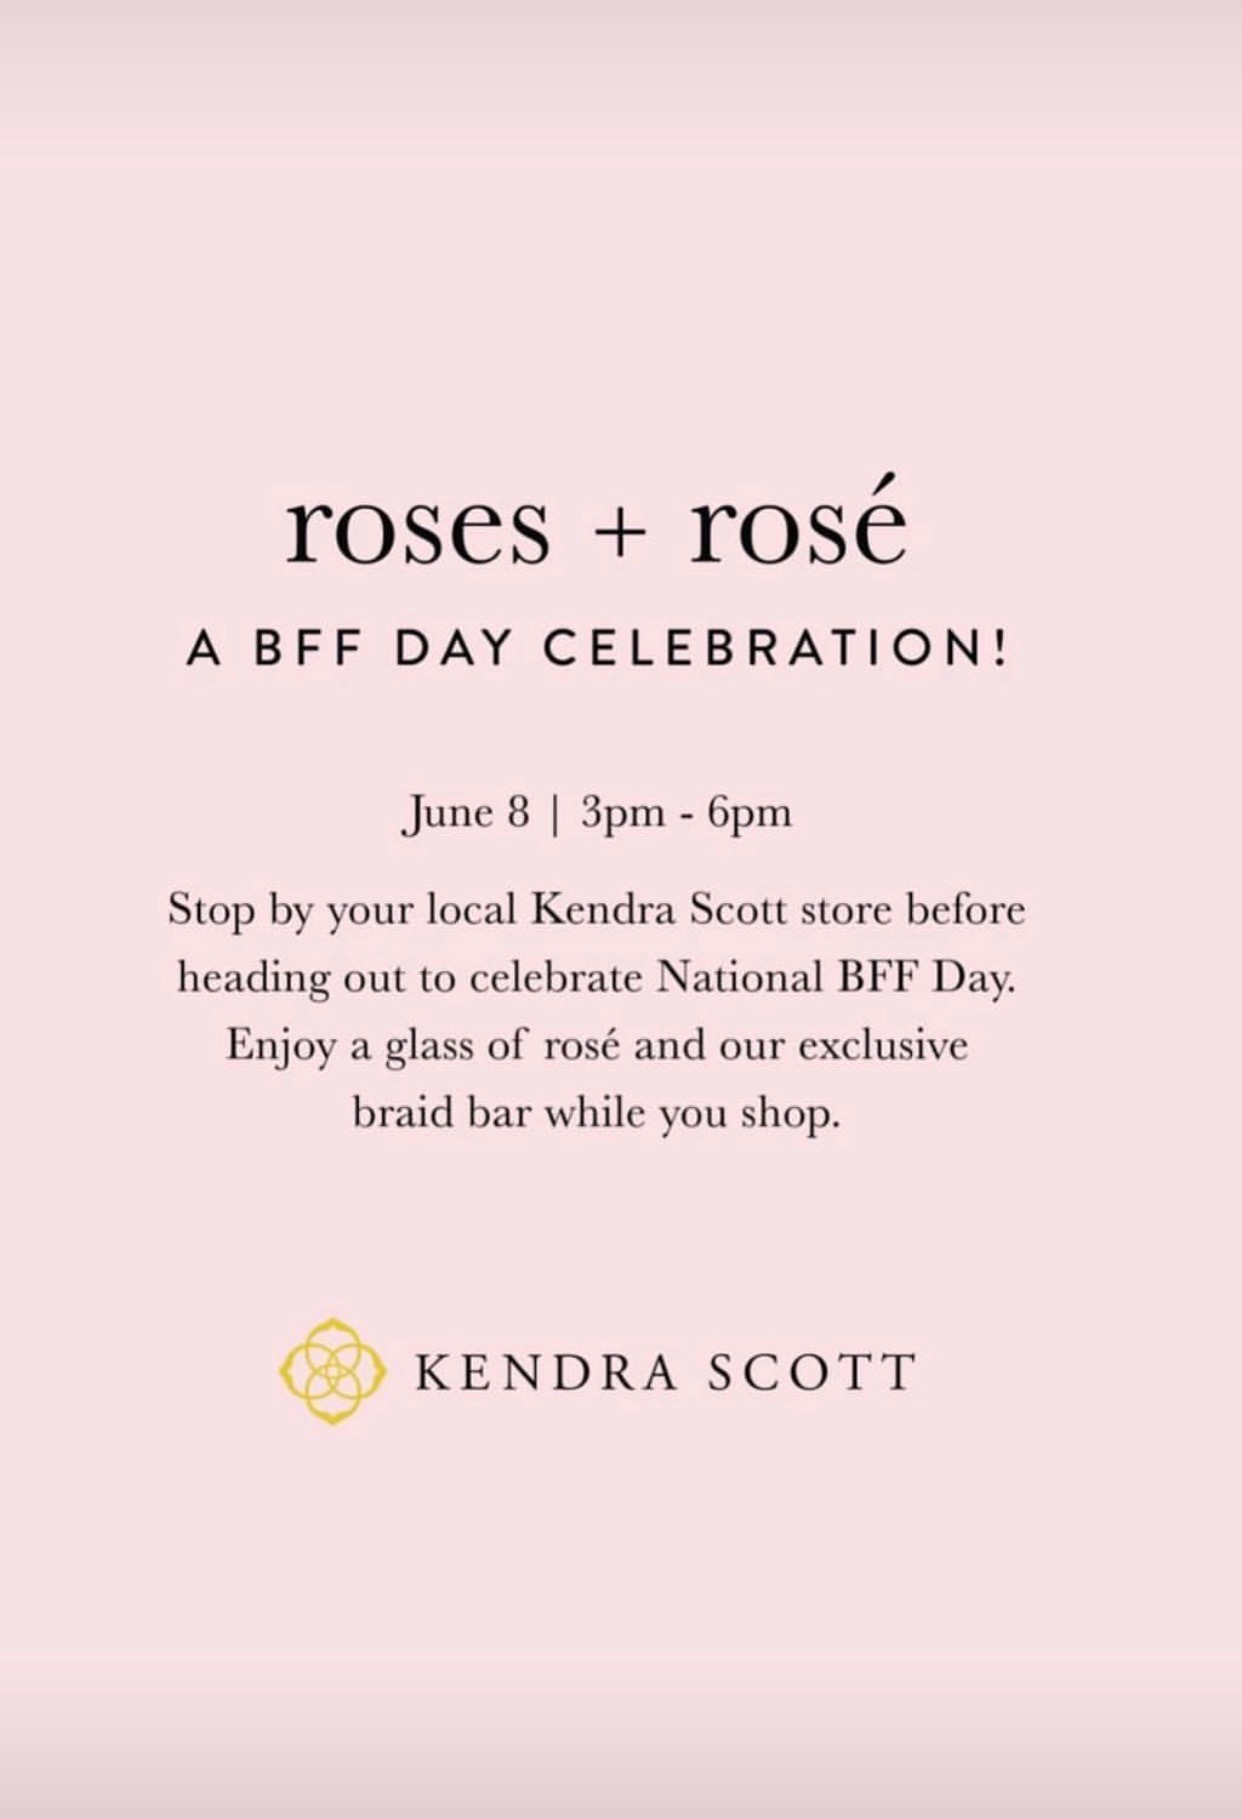 National Best Friend Day At Kendra Scott Sophisticaited